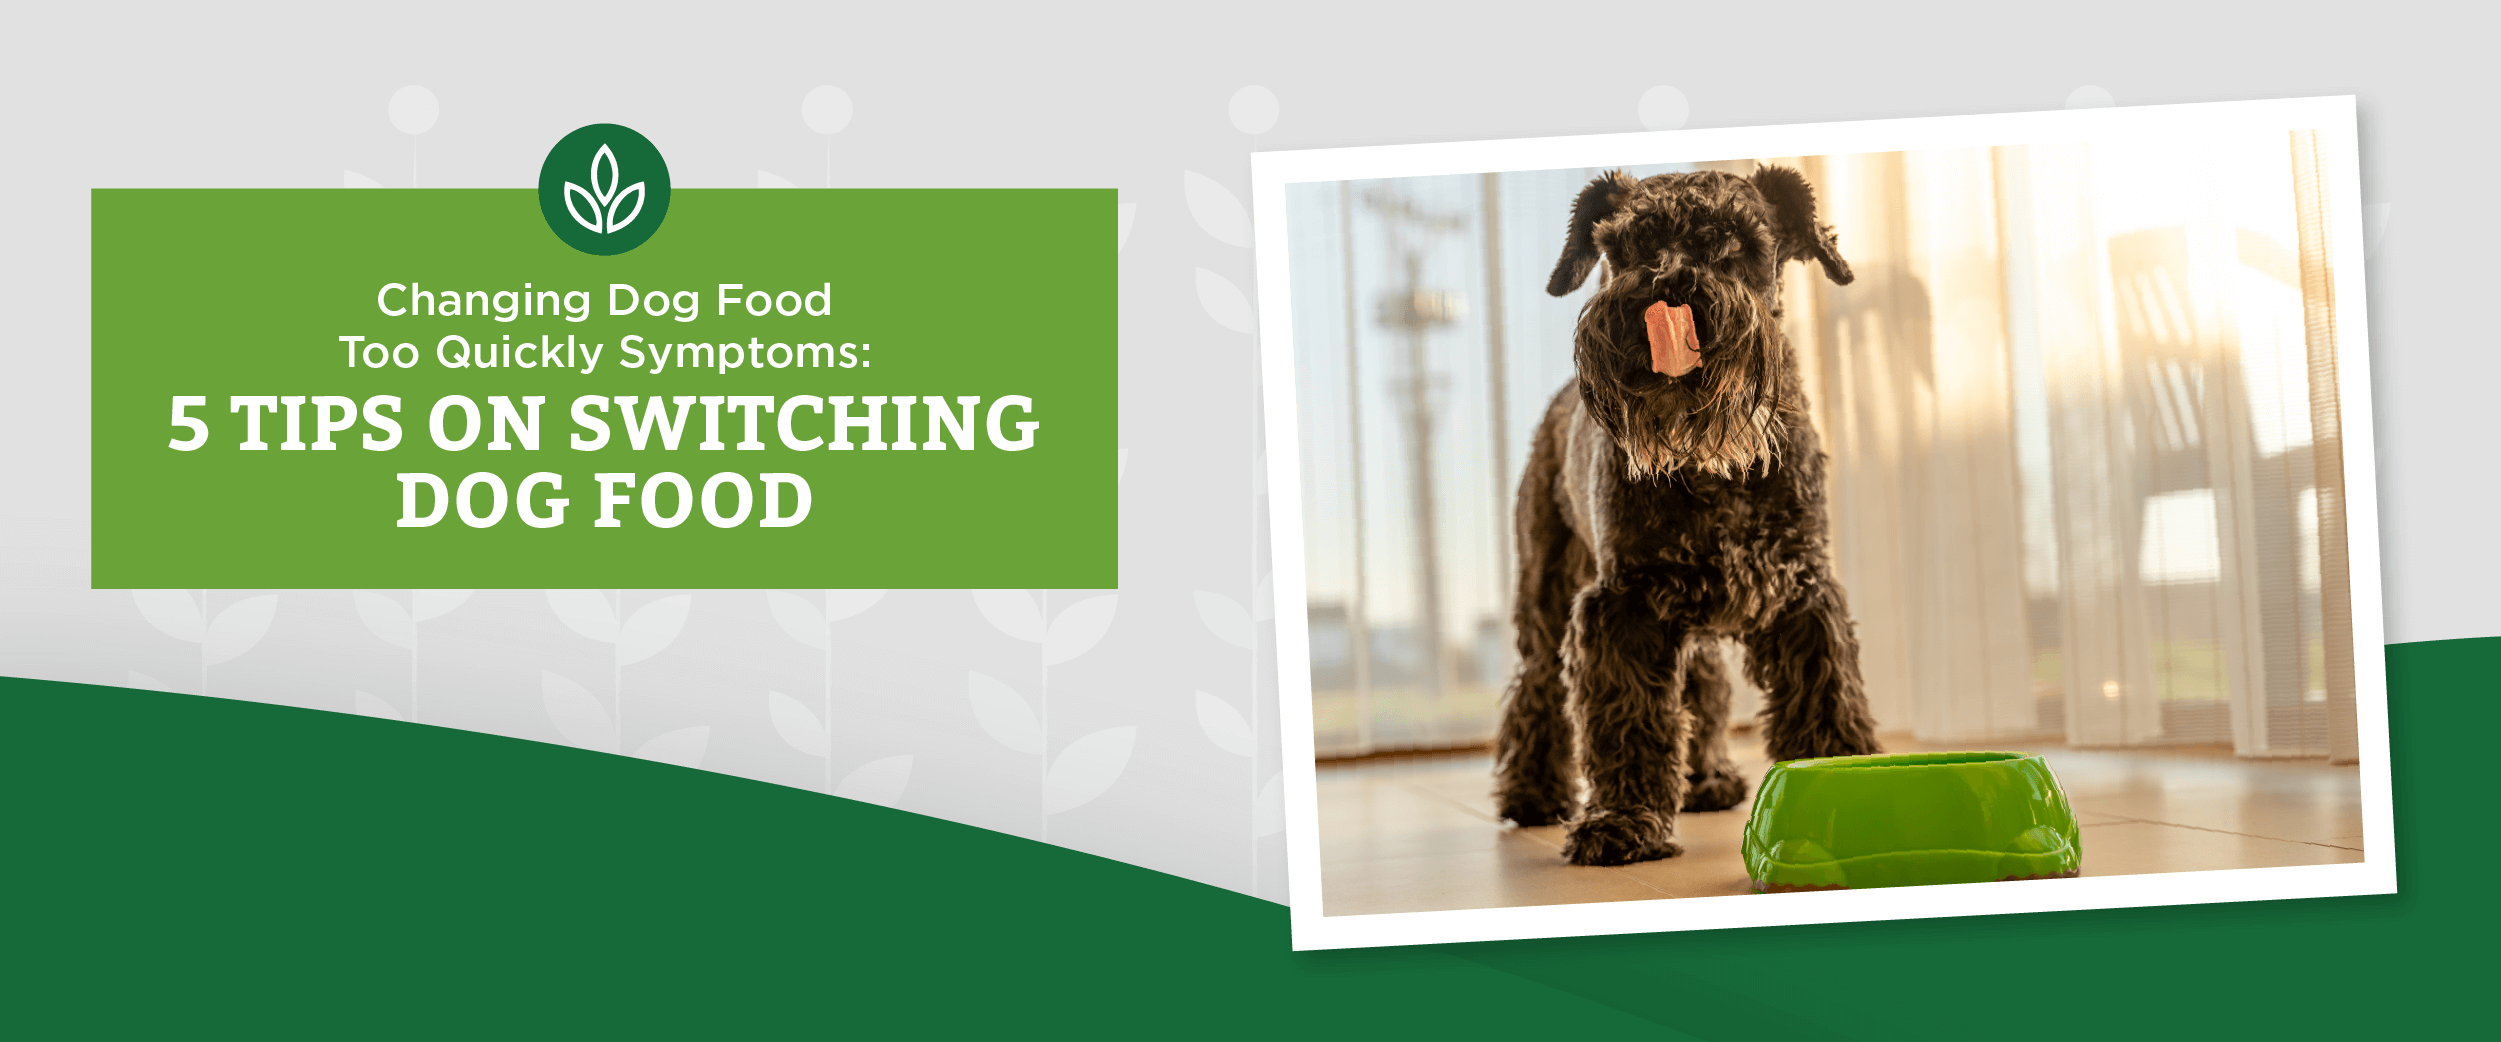 Symptoms of changing your dog’s food too quickly.